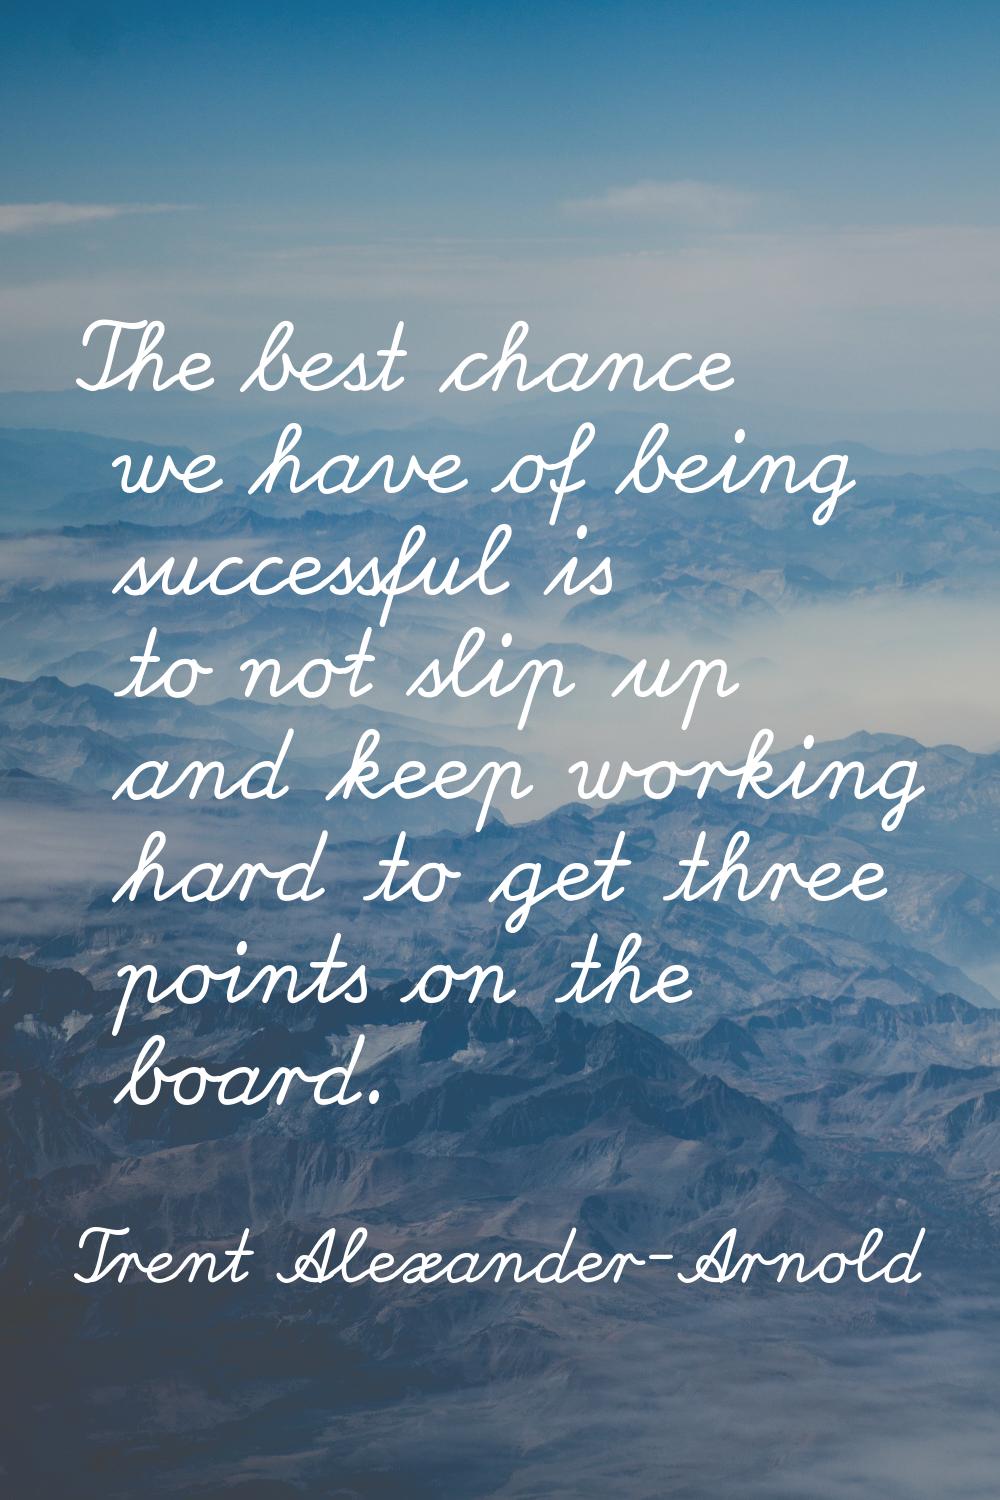 The best chance we have of being successful is to not slip up and keep working hard to get three po